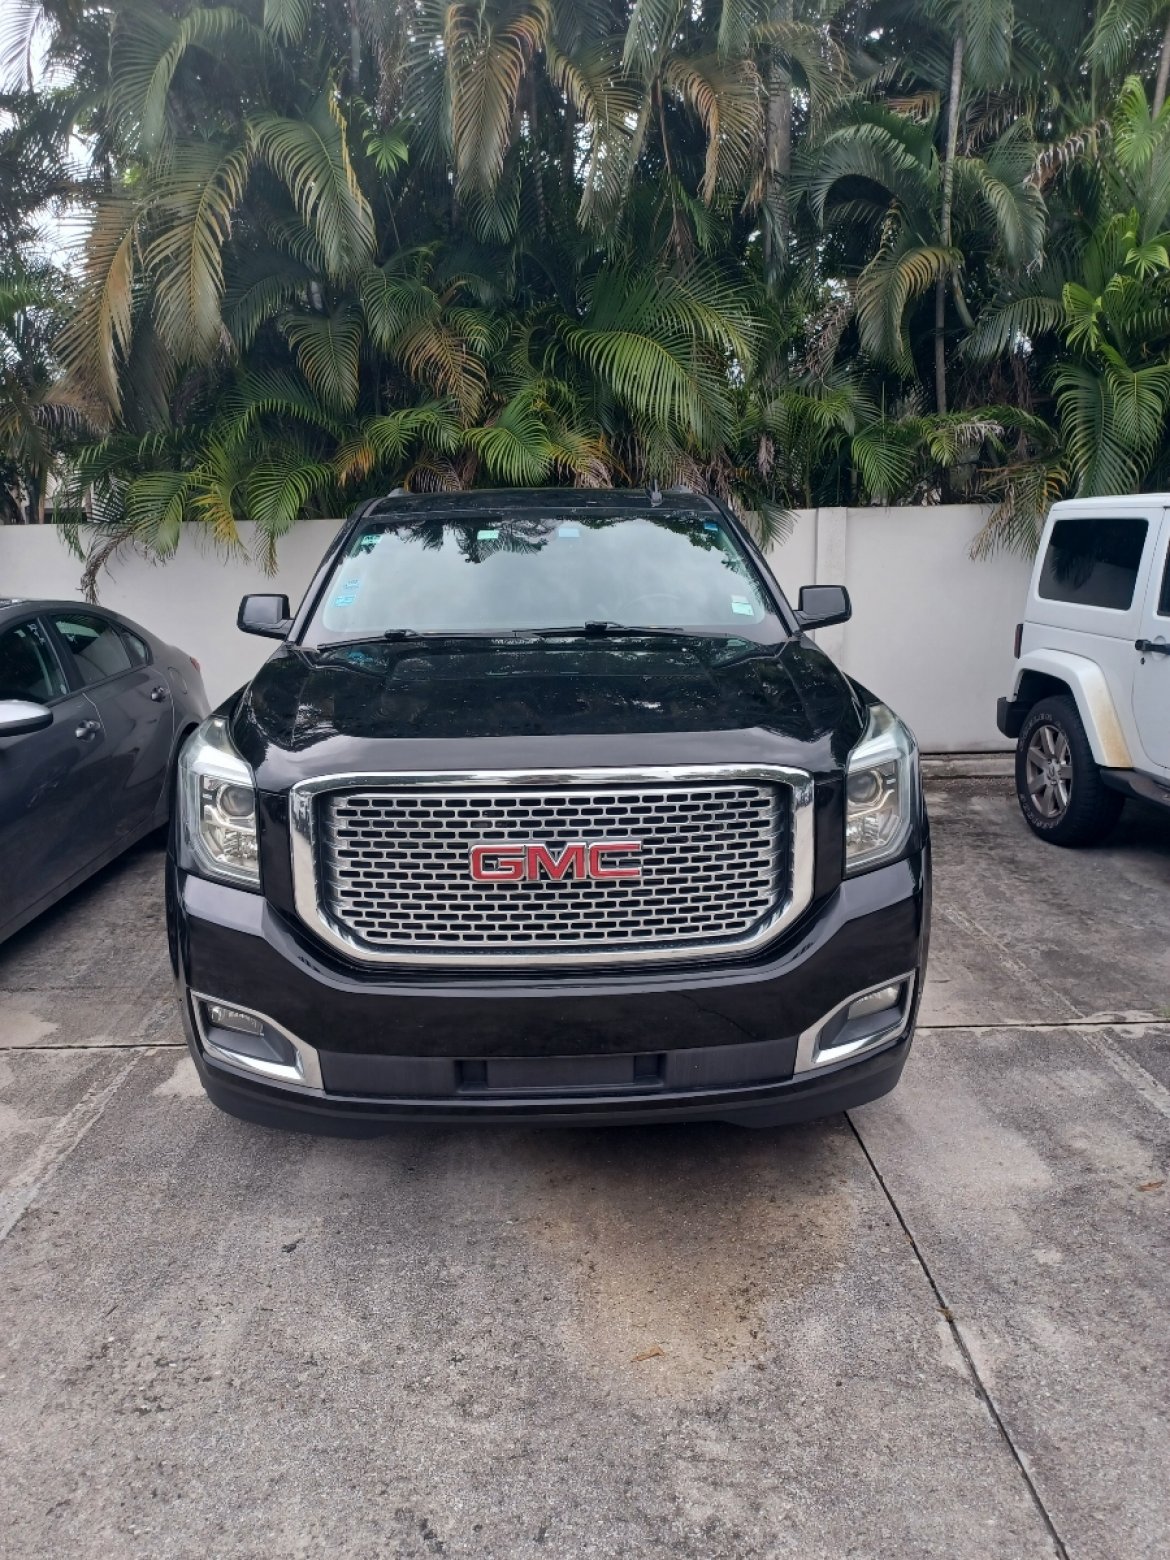 Used 2018 GMC Yukon for sale in West Palm Beach, FL #WS-17104 | We Sell ...